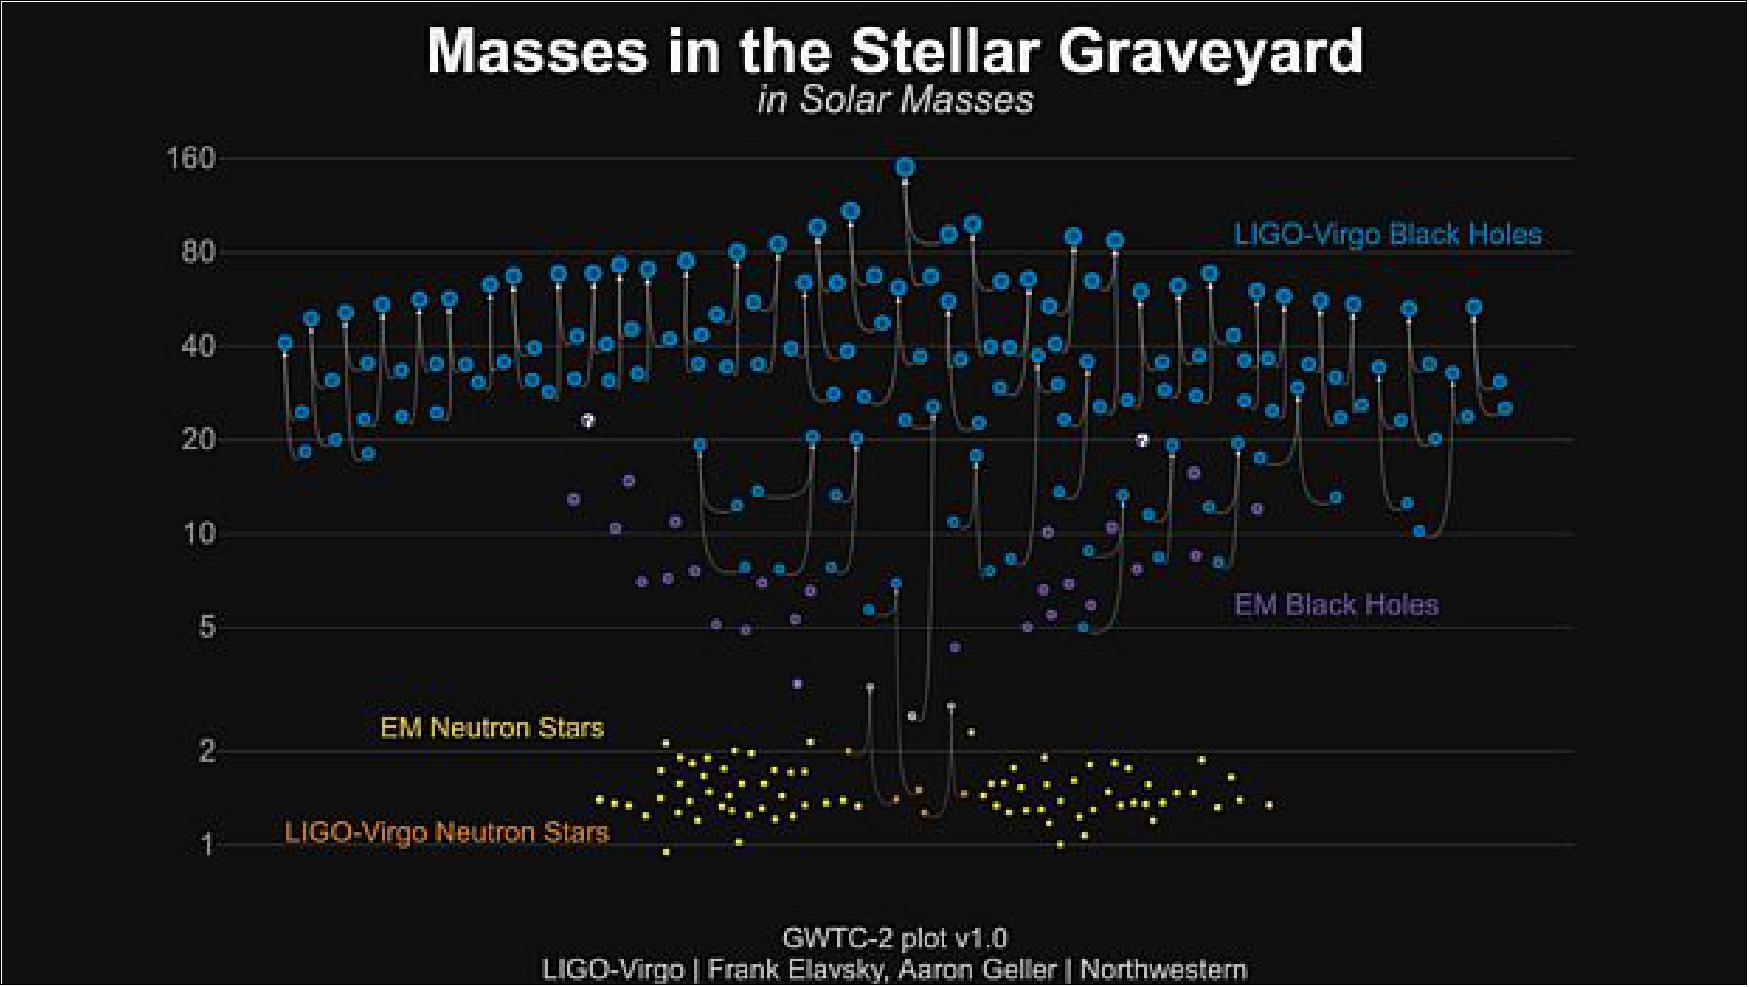 Figure 10: The second catalog of gravitational wave events 'GWTC-2', was published today. Since September 2015, LIGO/Virgo have detected 50 gravitational waves, including 39 new ones just from the first half of O3. This graphic illustrates the current total number and masses of LIGO/Virgo black hole and neutron star merger events (in blue) compared with previously known black holes (in purple). Mergers are indicated by arrows connecting two progenitor objects with a final merged object of higher mass (image credit: LIGO-Virgo / Northwestern U / Frank Elavsky & Aaron Geller)